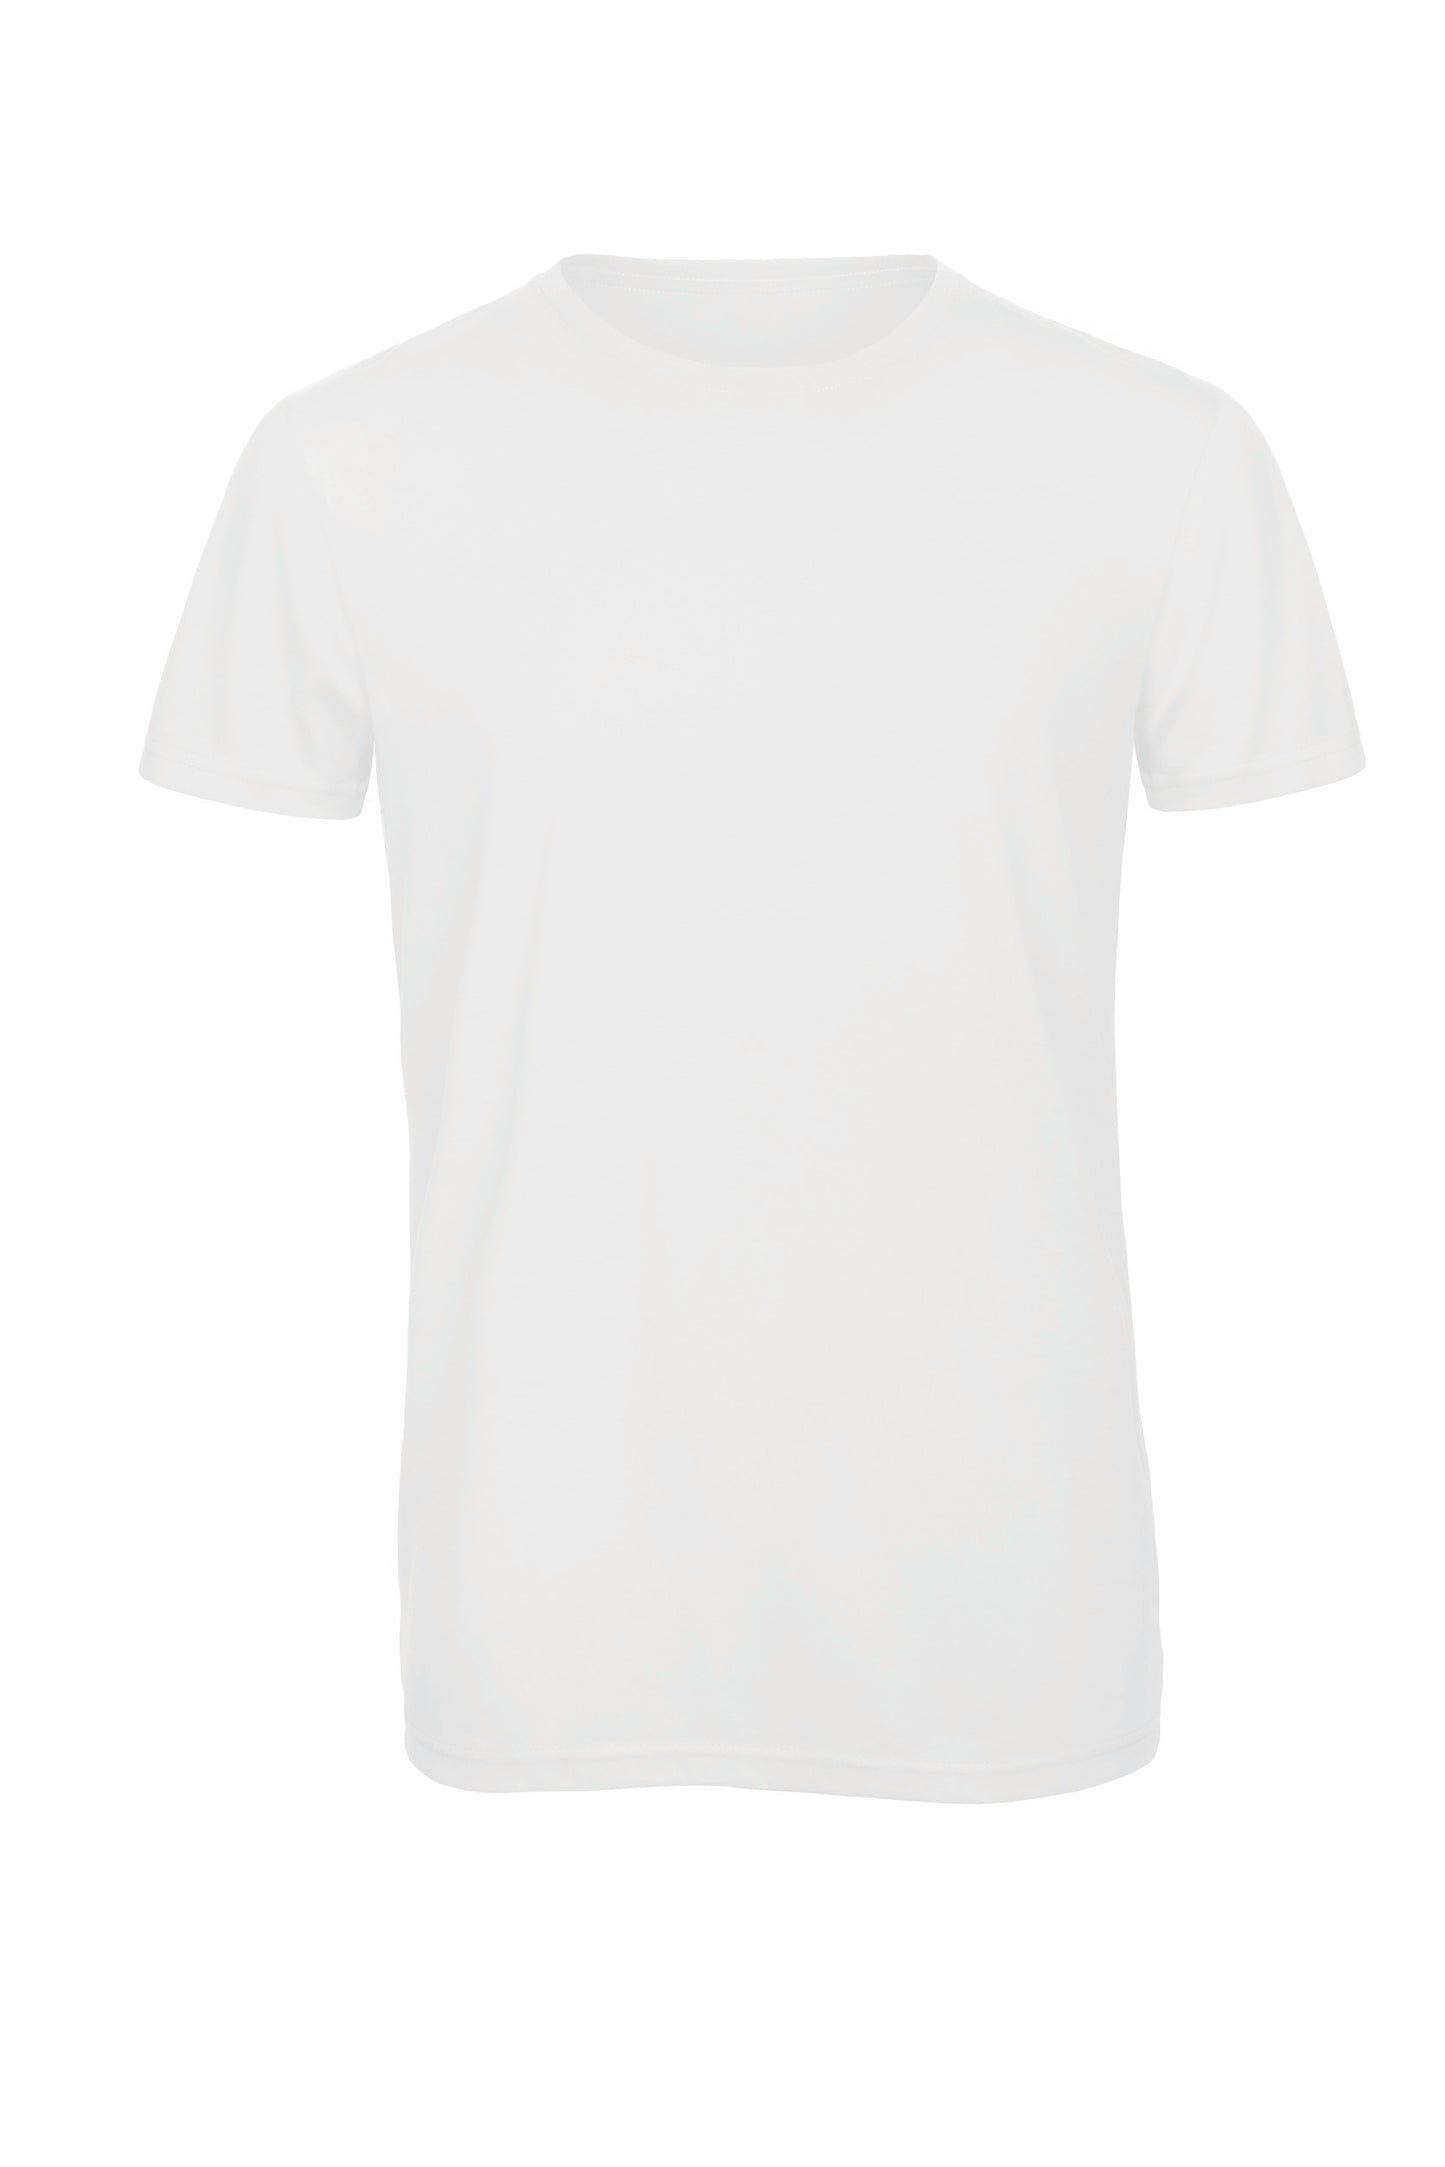 CGTM055 - T-shirt Triblend col rond Homme